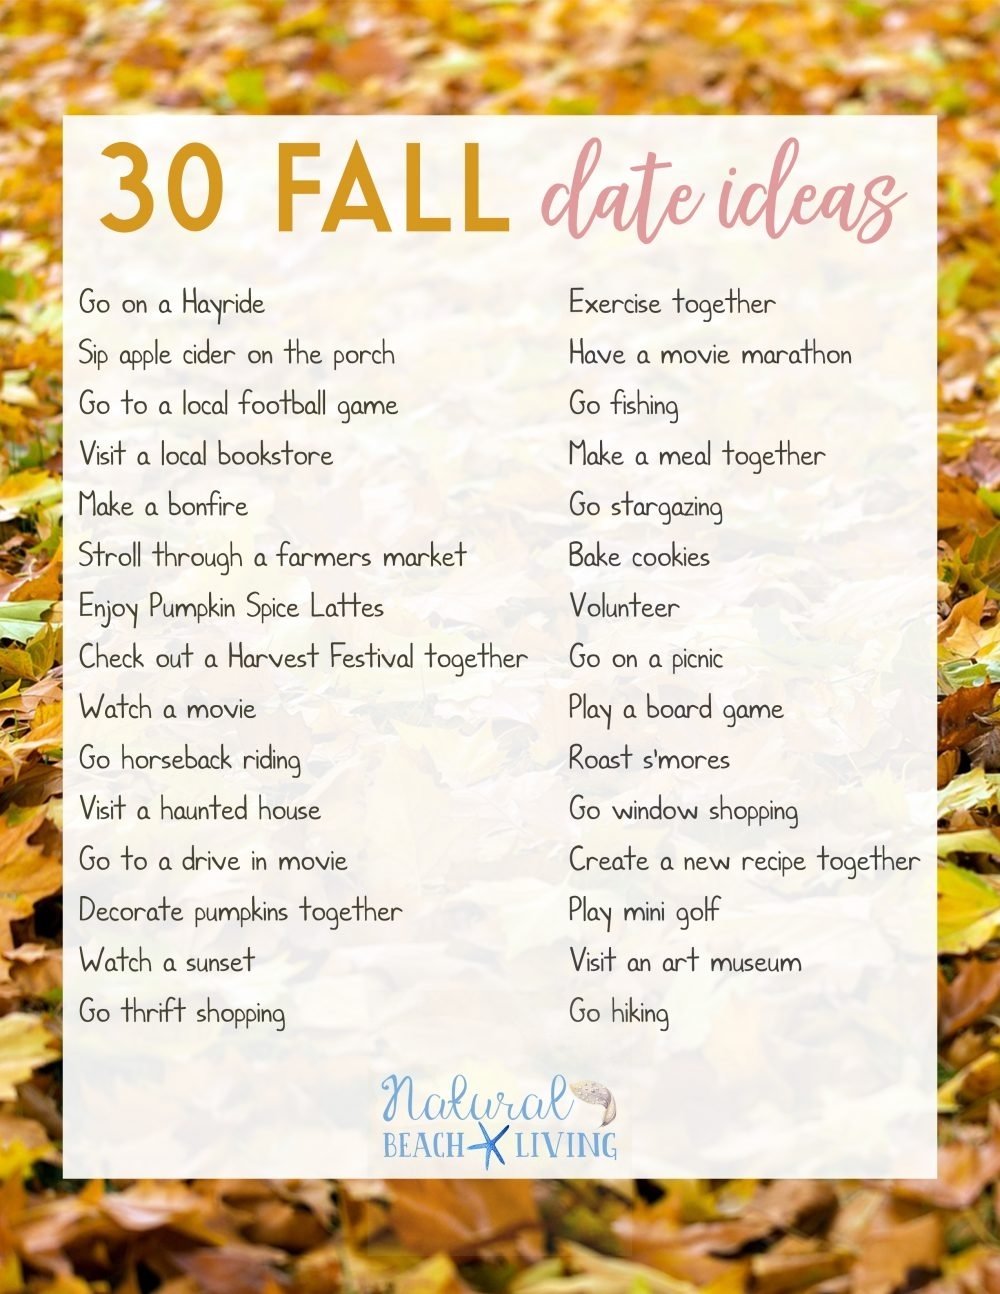 10 Ideal Date Night Ideas For Married Couples fun date night ideas for fall natural beach living 20 2022